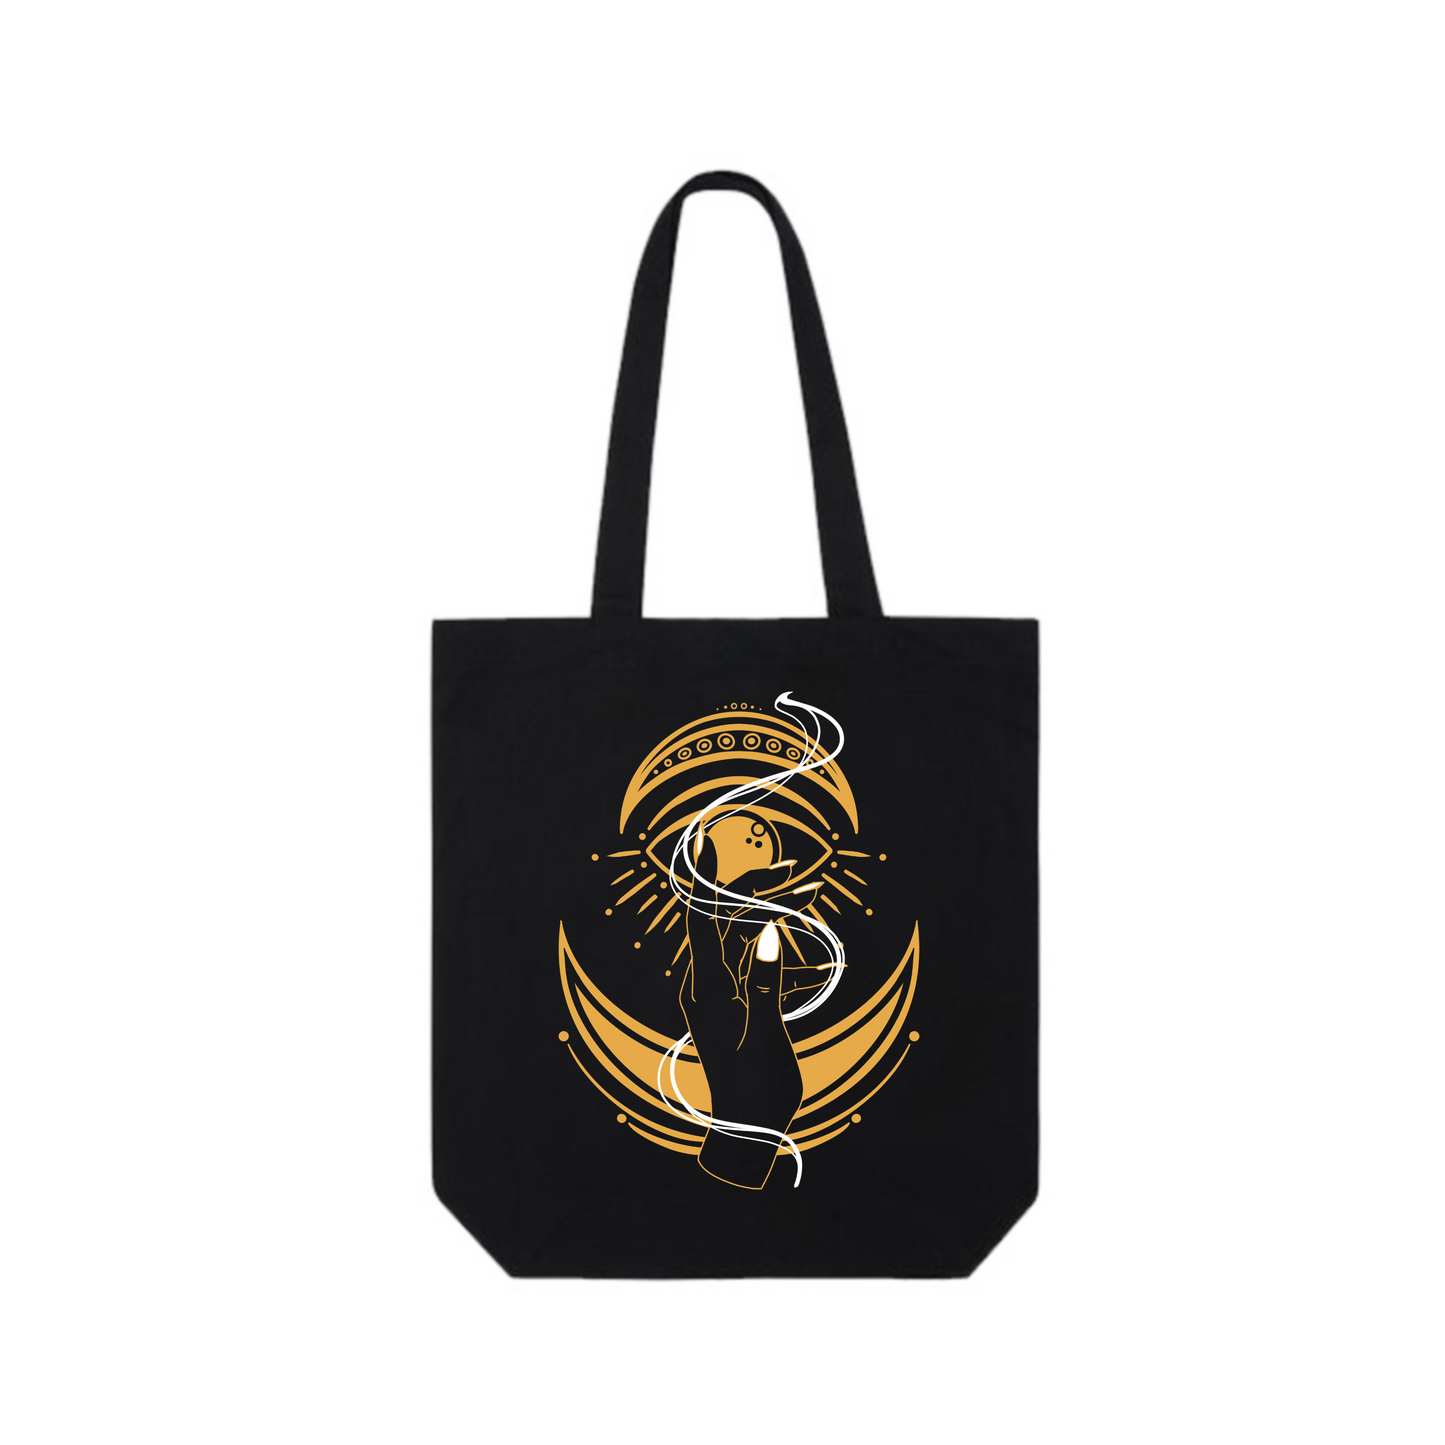 Cure Wounds - Tote Bag, Celestial Warlock Collection